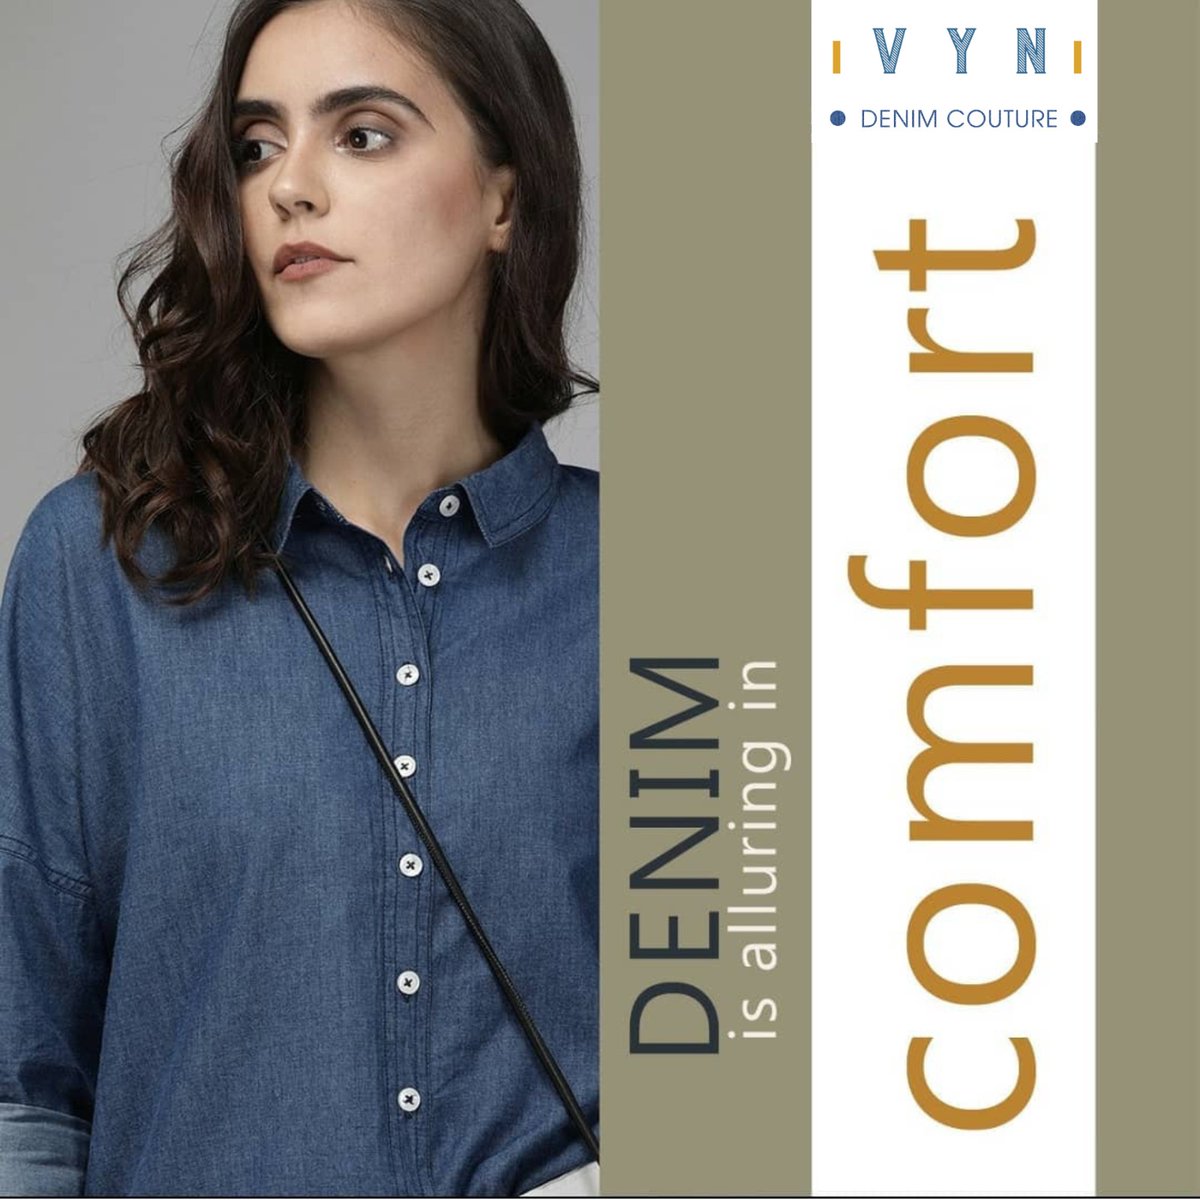 Beauty is a state of mind, and it can come in all shapes and sizes. Just like our denim.

#VYN #VYNFashion #VYNClothing #comfortablefashion #beyourself #denimwear #model #blueonyou #instafashion #dresswithus #lovedress #alluring #beincomfort #beauty #ourdenim #buynow #shape